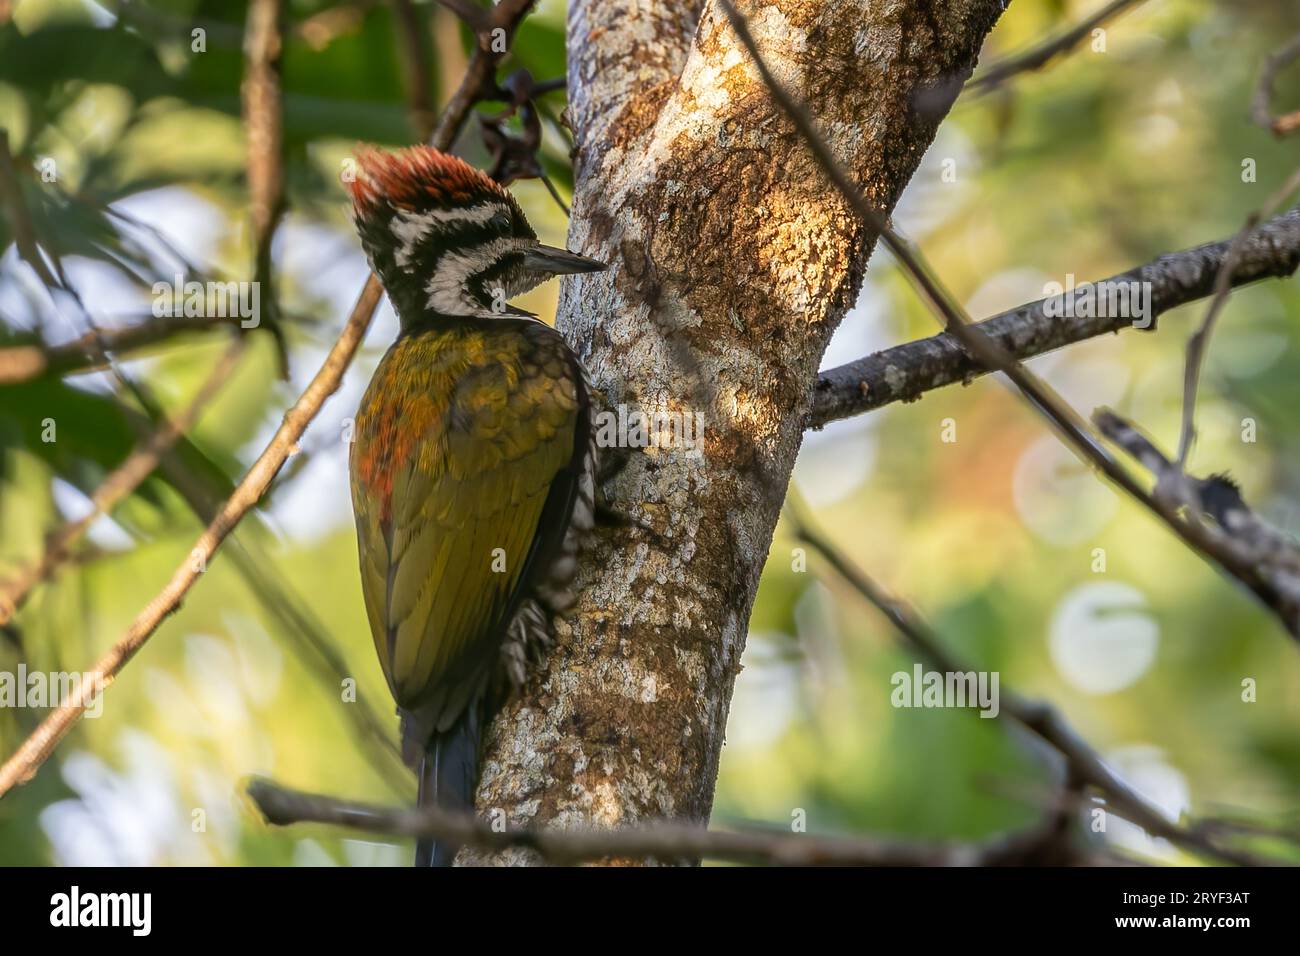 Nature wildlife of Common flameback woodpecker drilling bark tree finding food like insect in nature Stock Photo